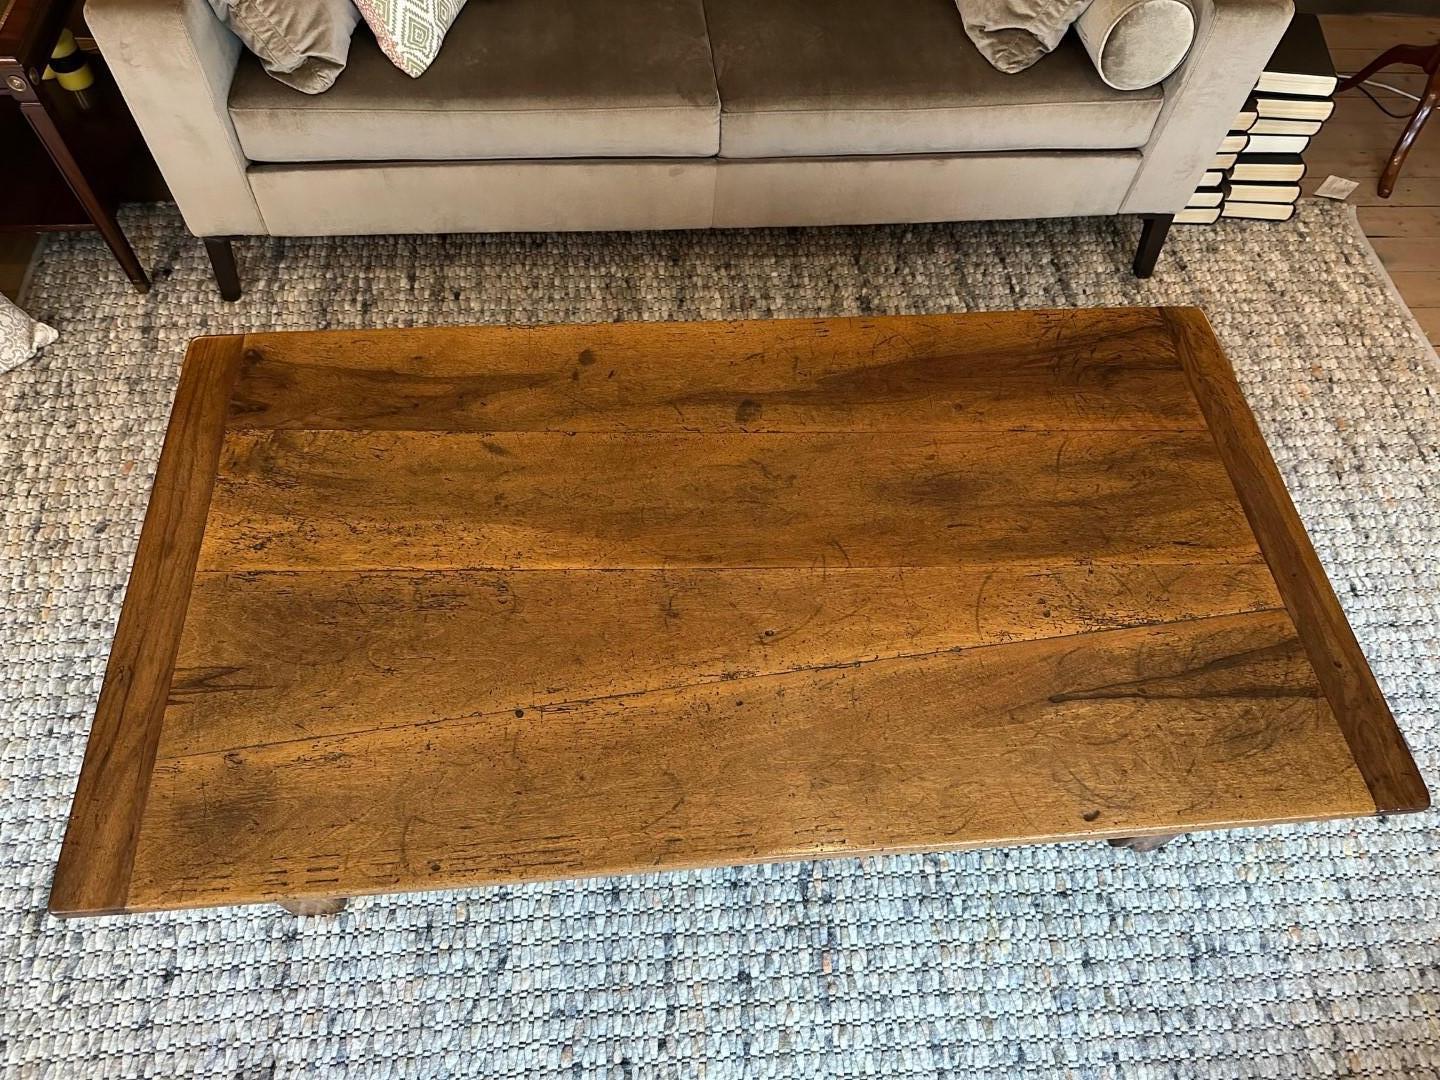 Antique walnut coffee table with 2 drawers from France. Table has a beautiful patina. Completely in perfect condition.

Origin: France
Period: Approx. 1820
Size:148cm x 77cm x h.50cm
​